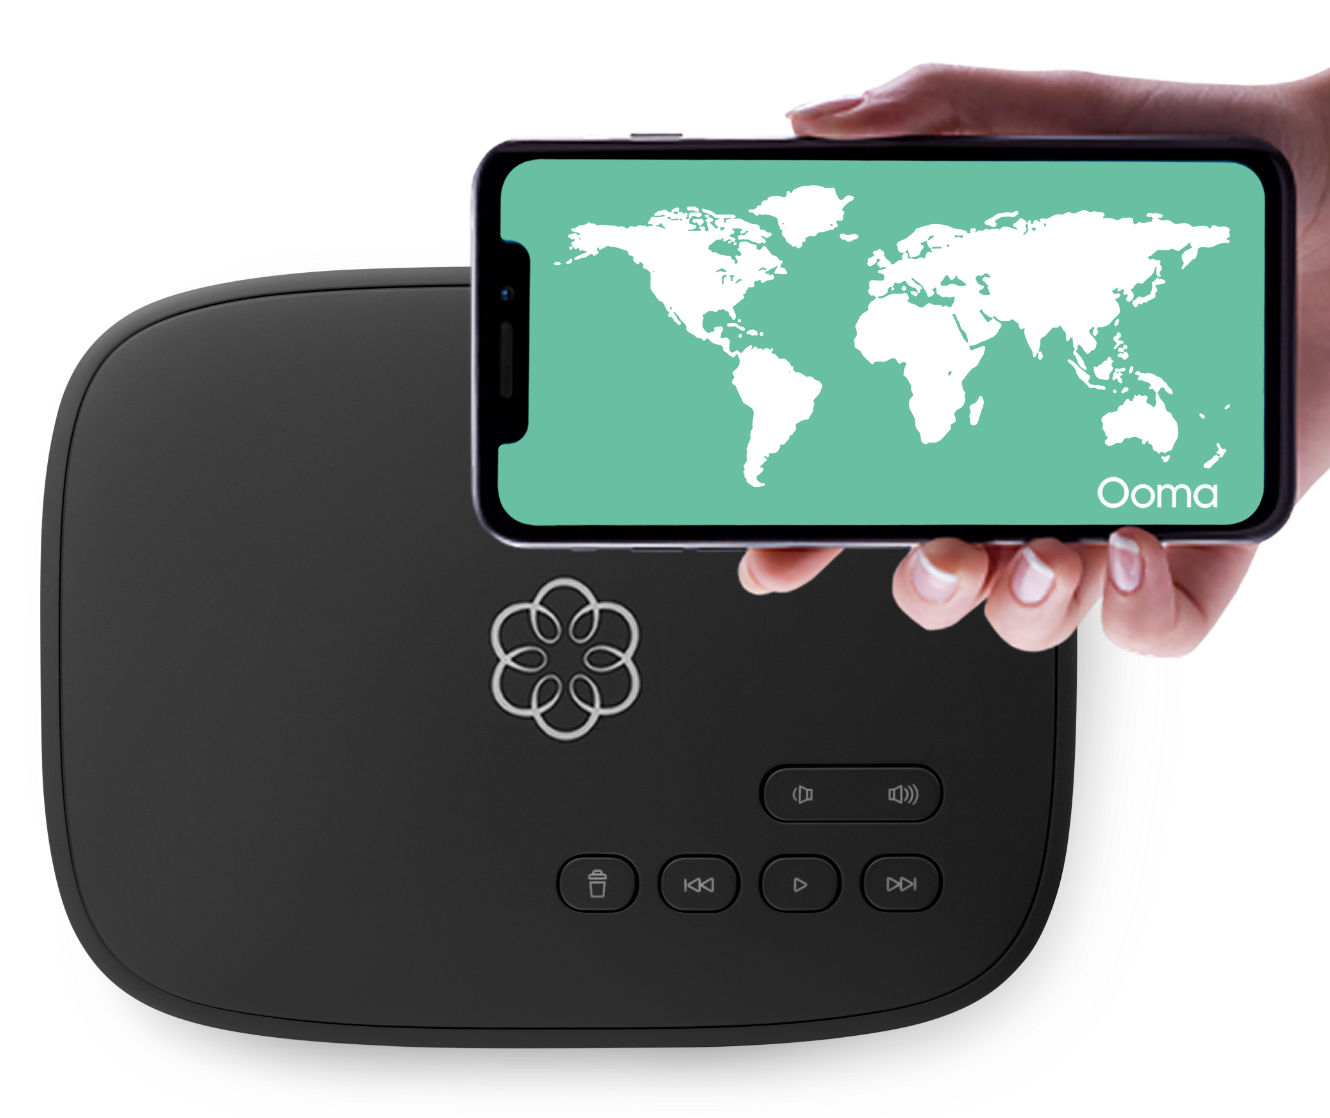 Ooma World Plan: Unlimited international calling image - Telo with Ooma App